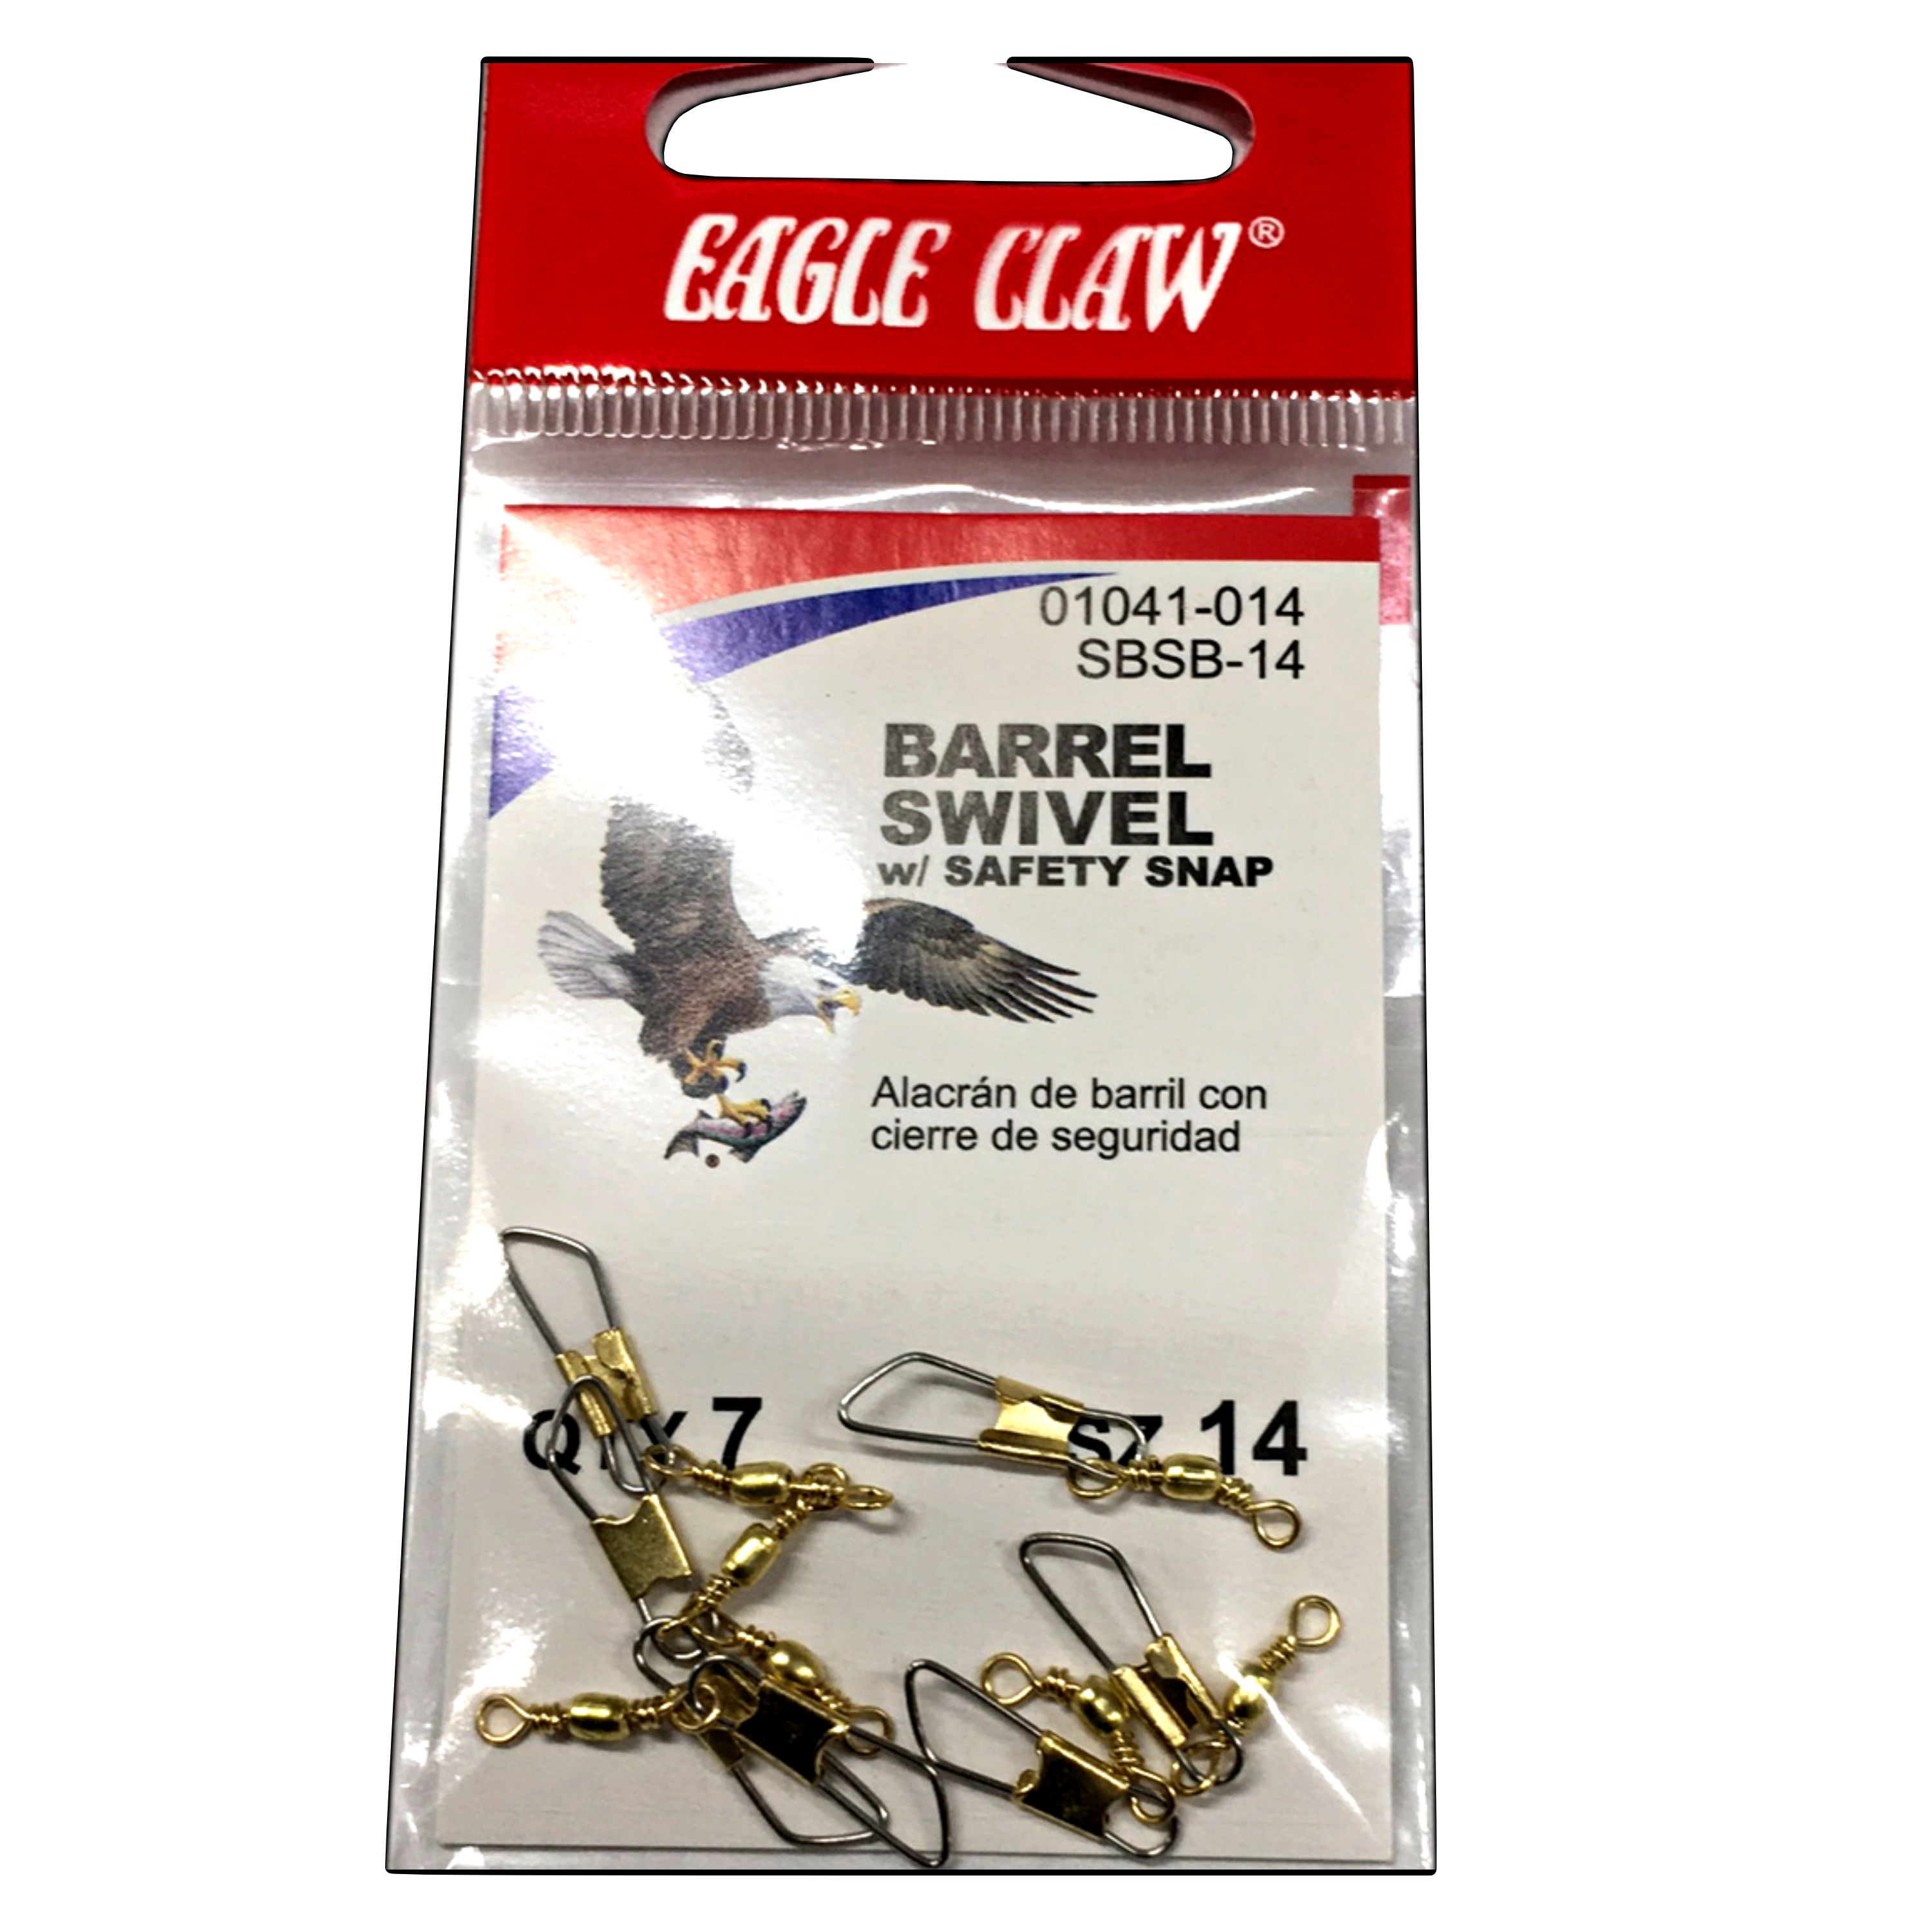 Eagle Claw Barrel Safety Snap Swivel - 20 Pack, Size 16, Black